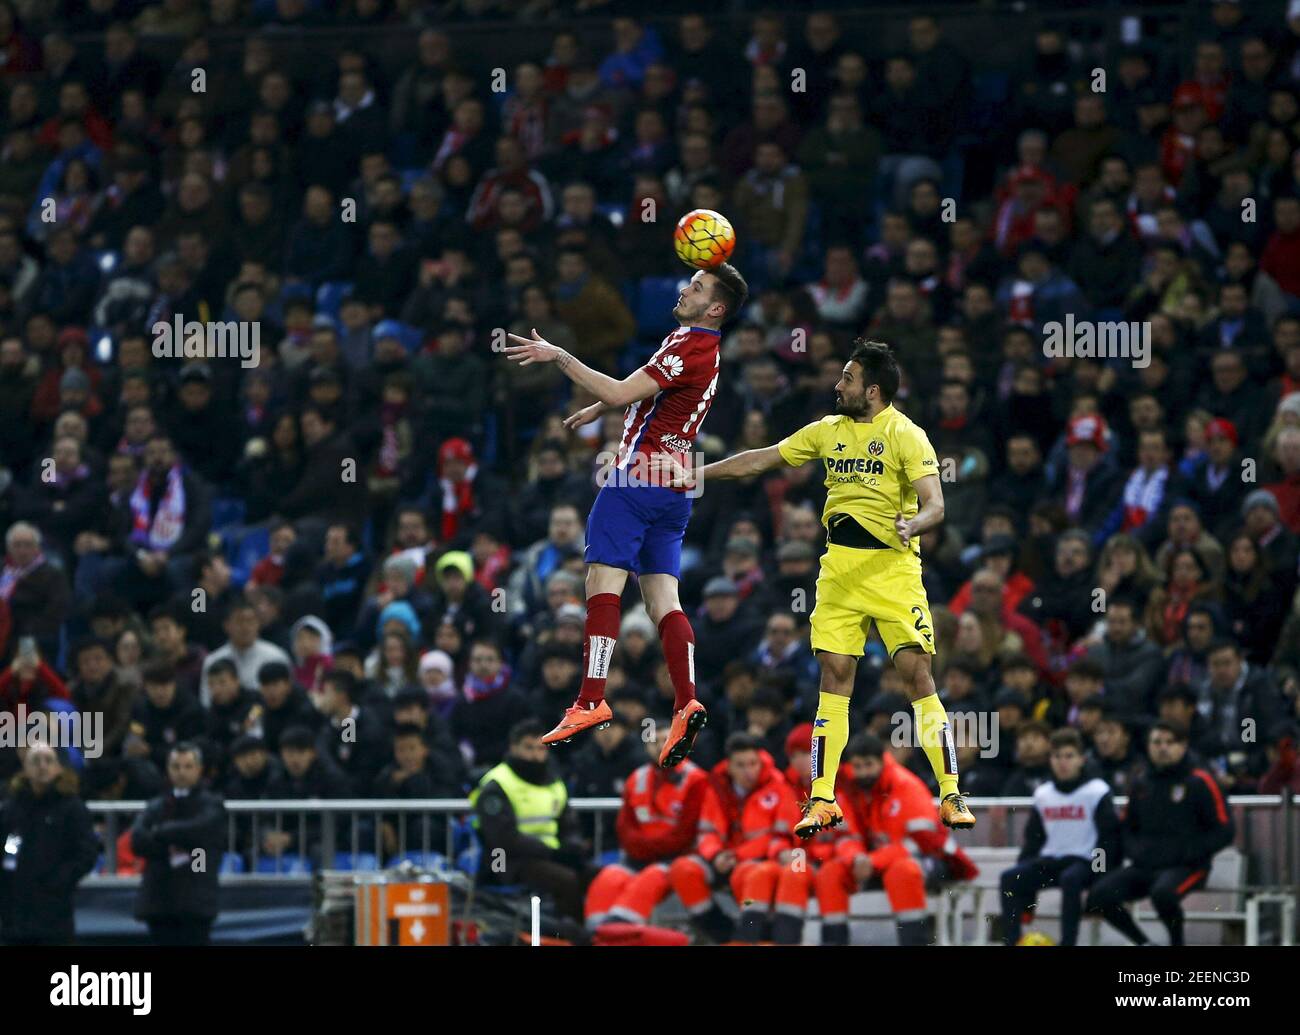 Football Soccer - Atletico Madrid v Villarreal - Spanish Liga BBVA - Vicente Calderon stadium, Madrid, Spain - 21/2/16 Atletico Madrid's Saul Niguez and Villarreal's Mario Gaspar Perez in action REUTERS/Susana Vera      TPX IMAGES OF THE DAY        Picture Supplied by Action Images Stock Photo